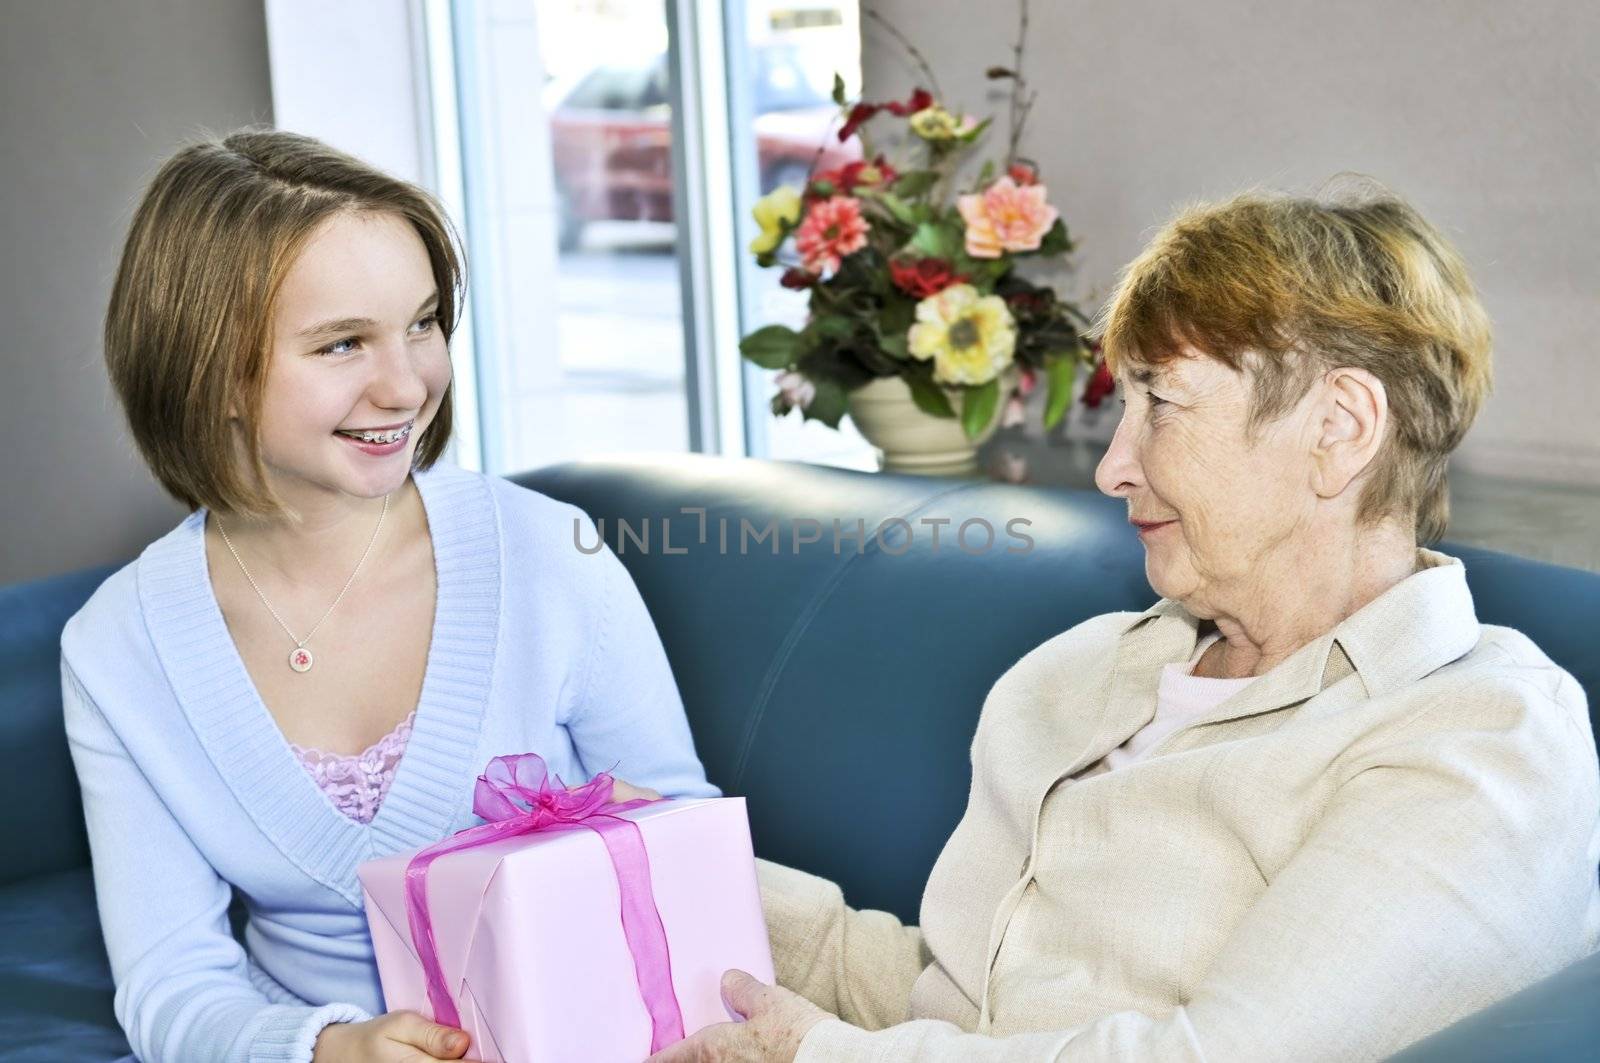 Granddaughter giving a present to her grandmother